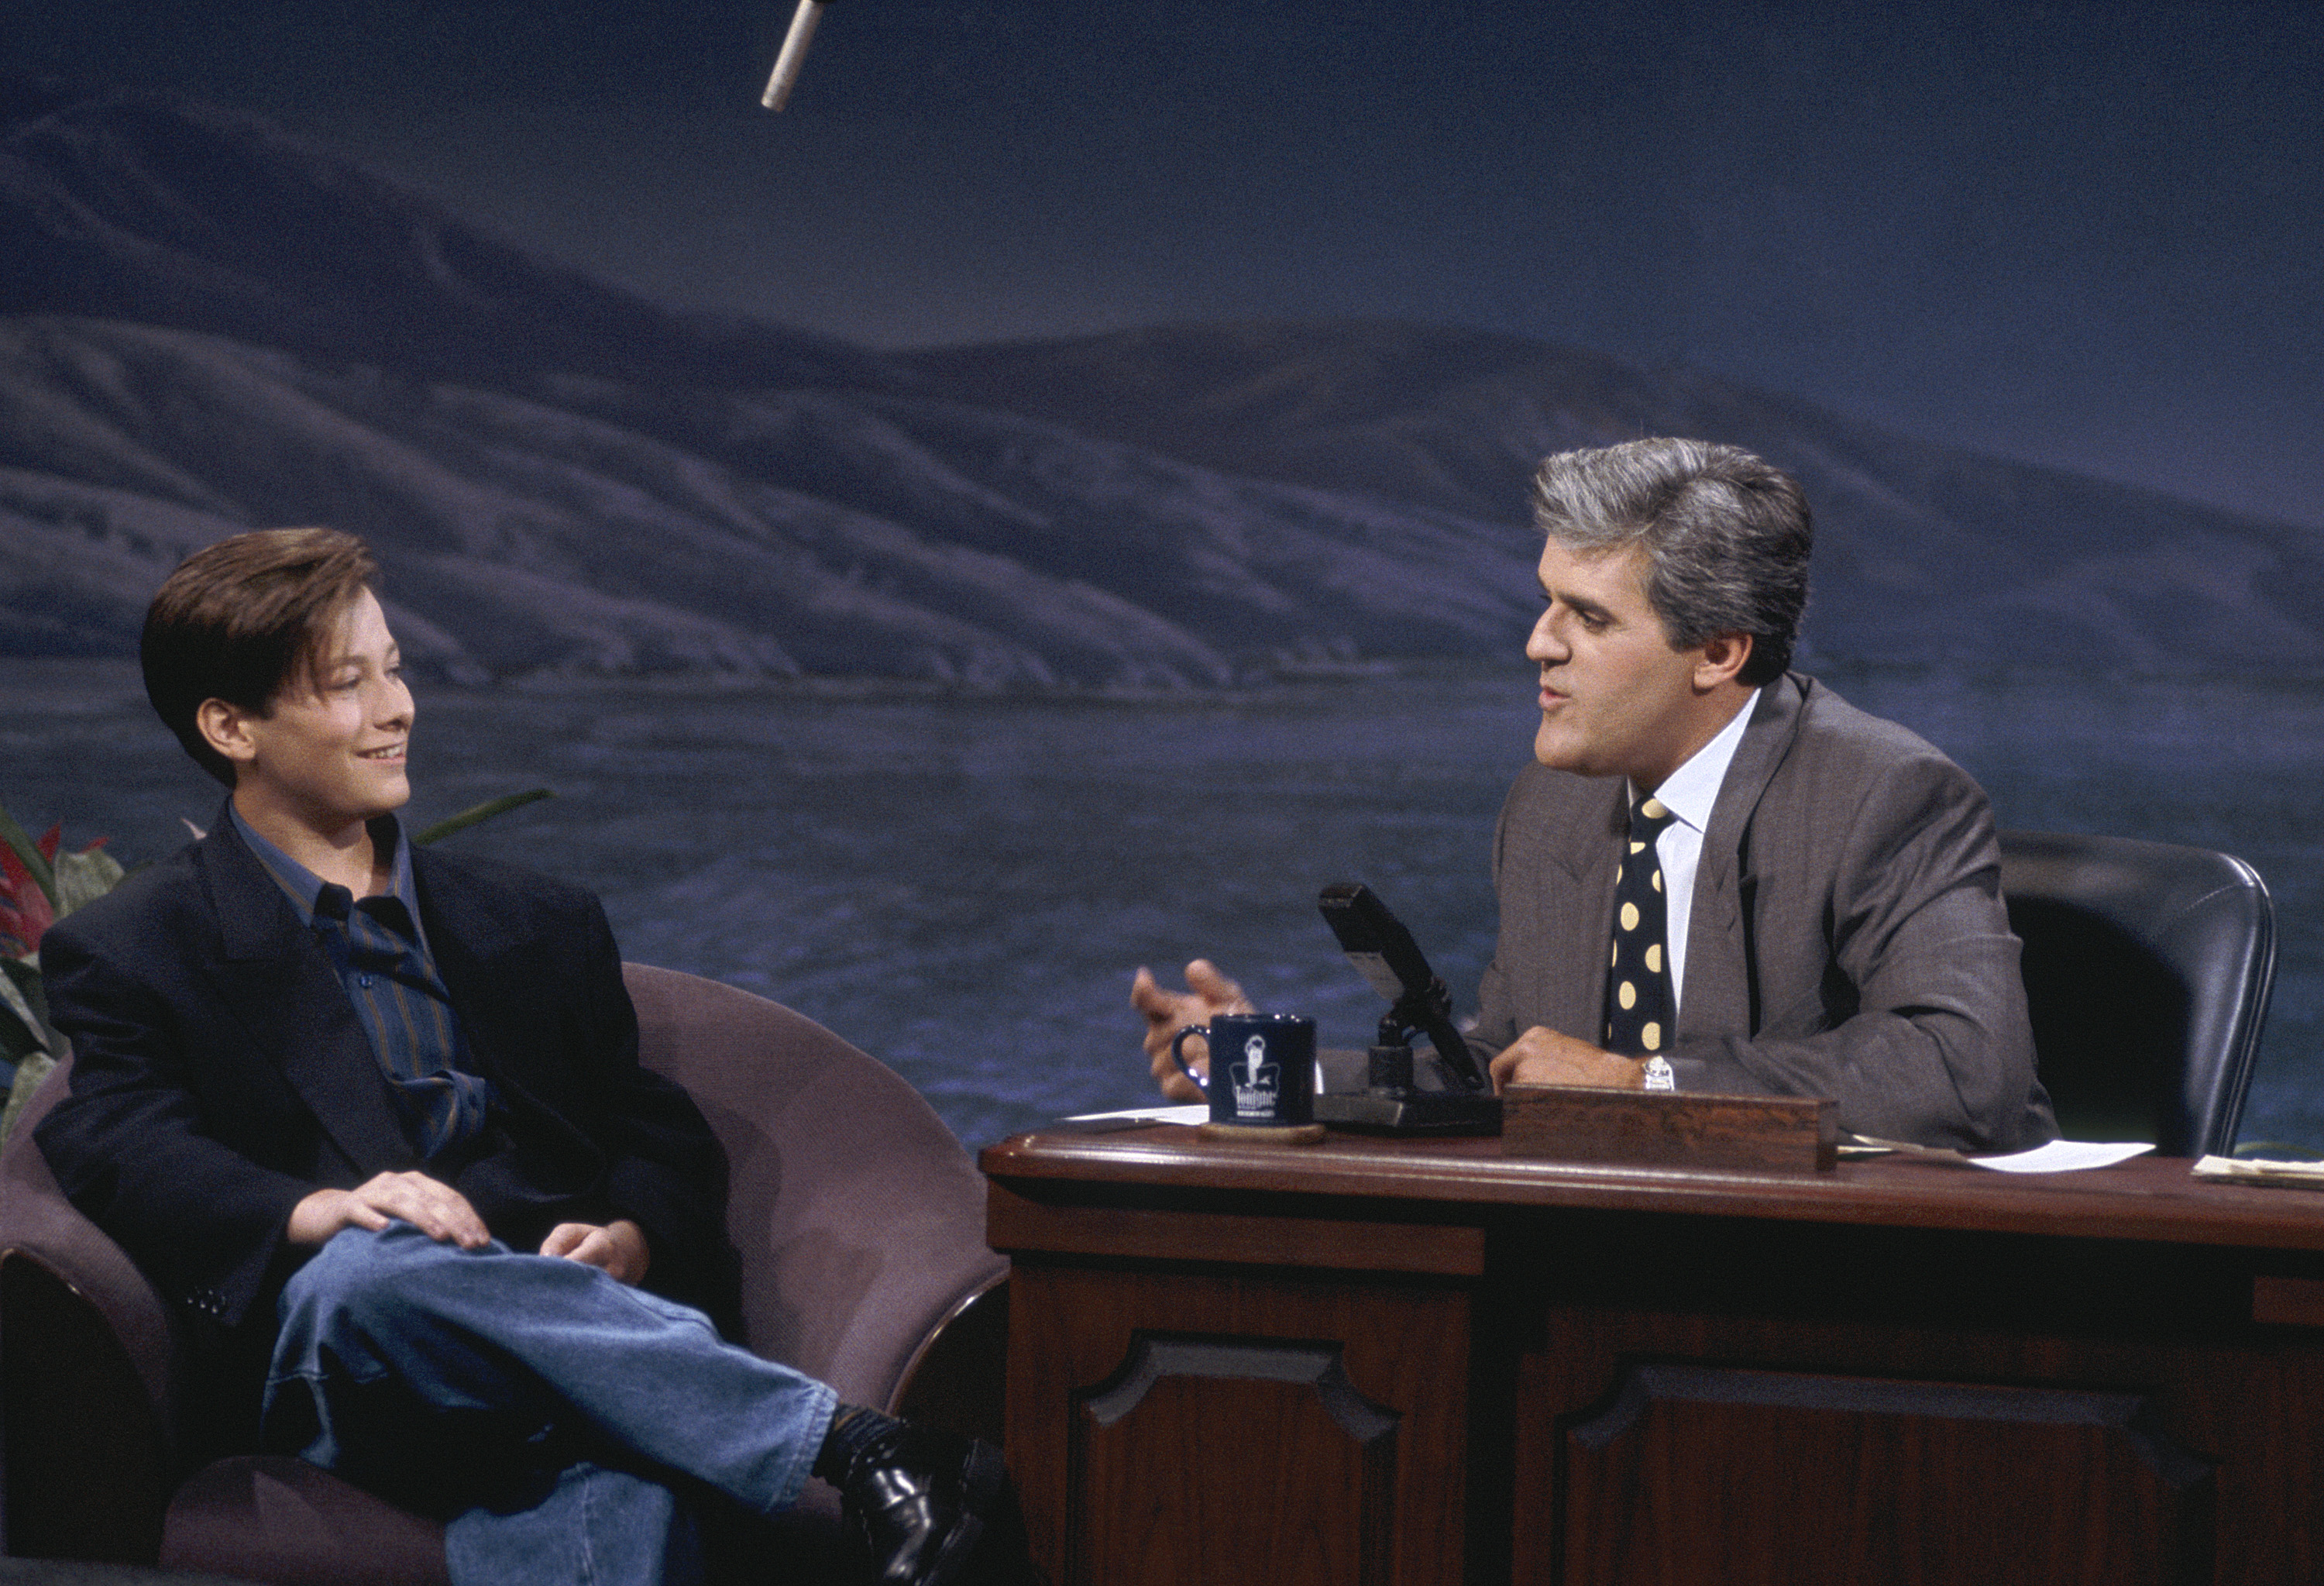 Edward Furlong during an interview with host Jay Leno on September 2, 1992 | Source: Getty Images